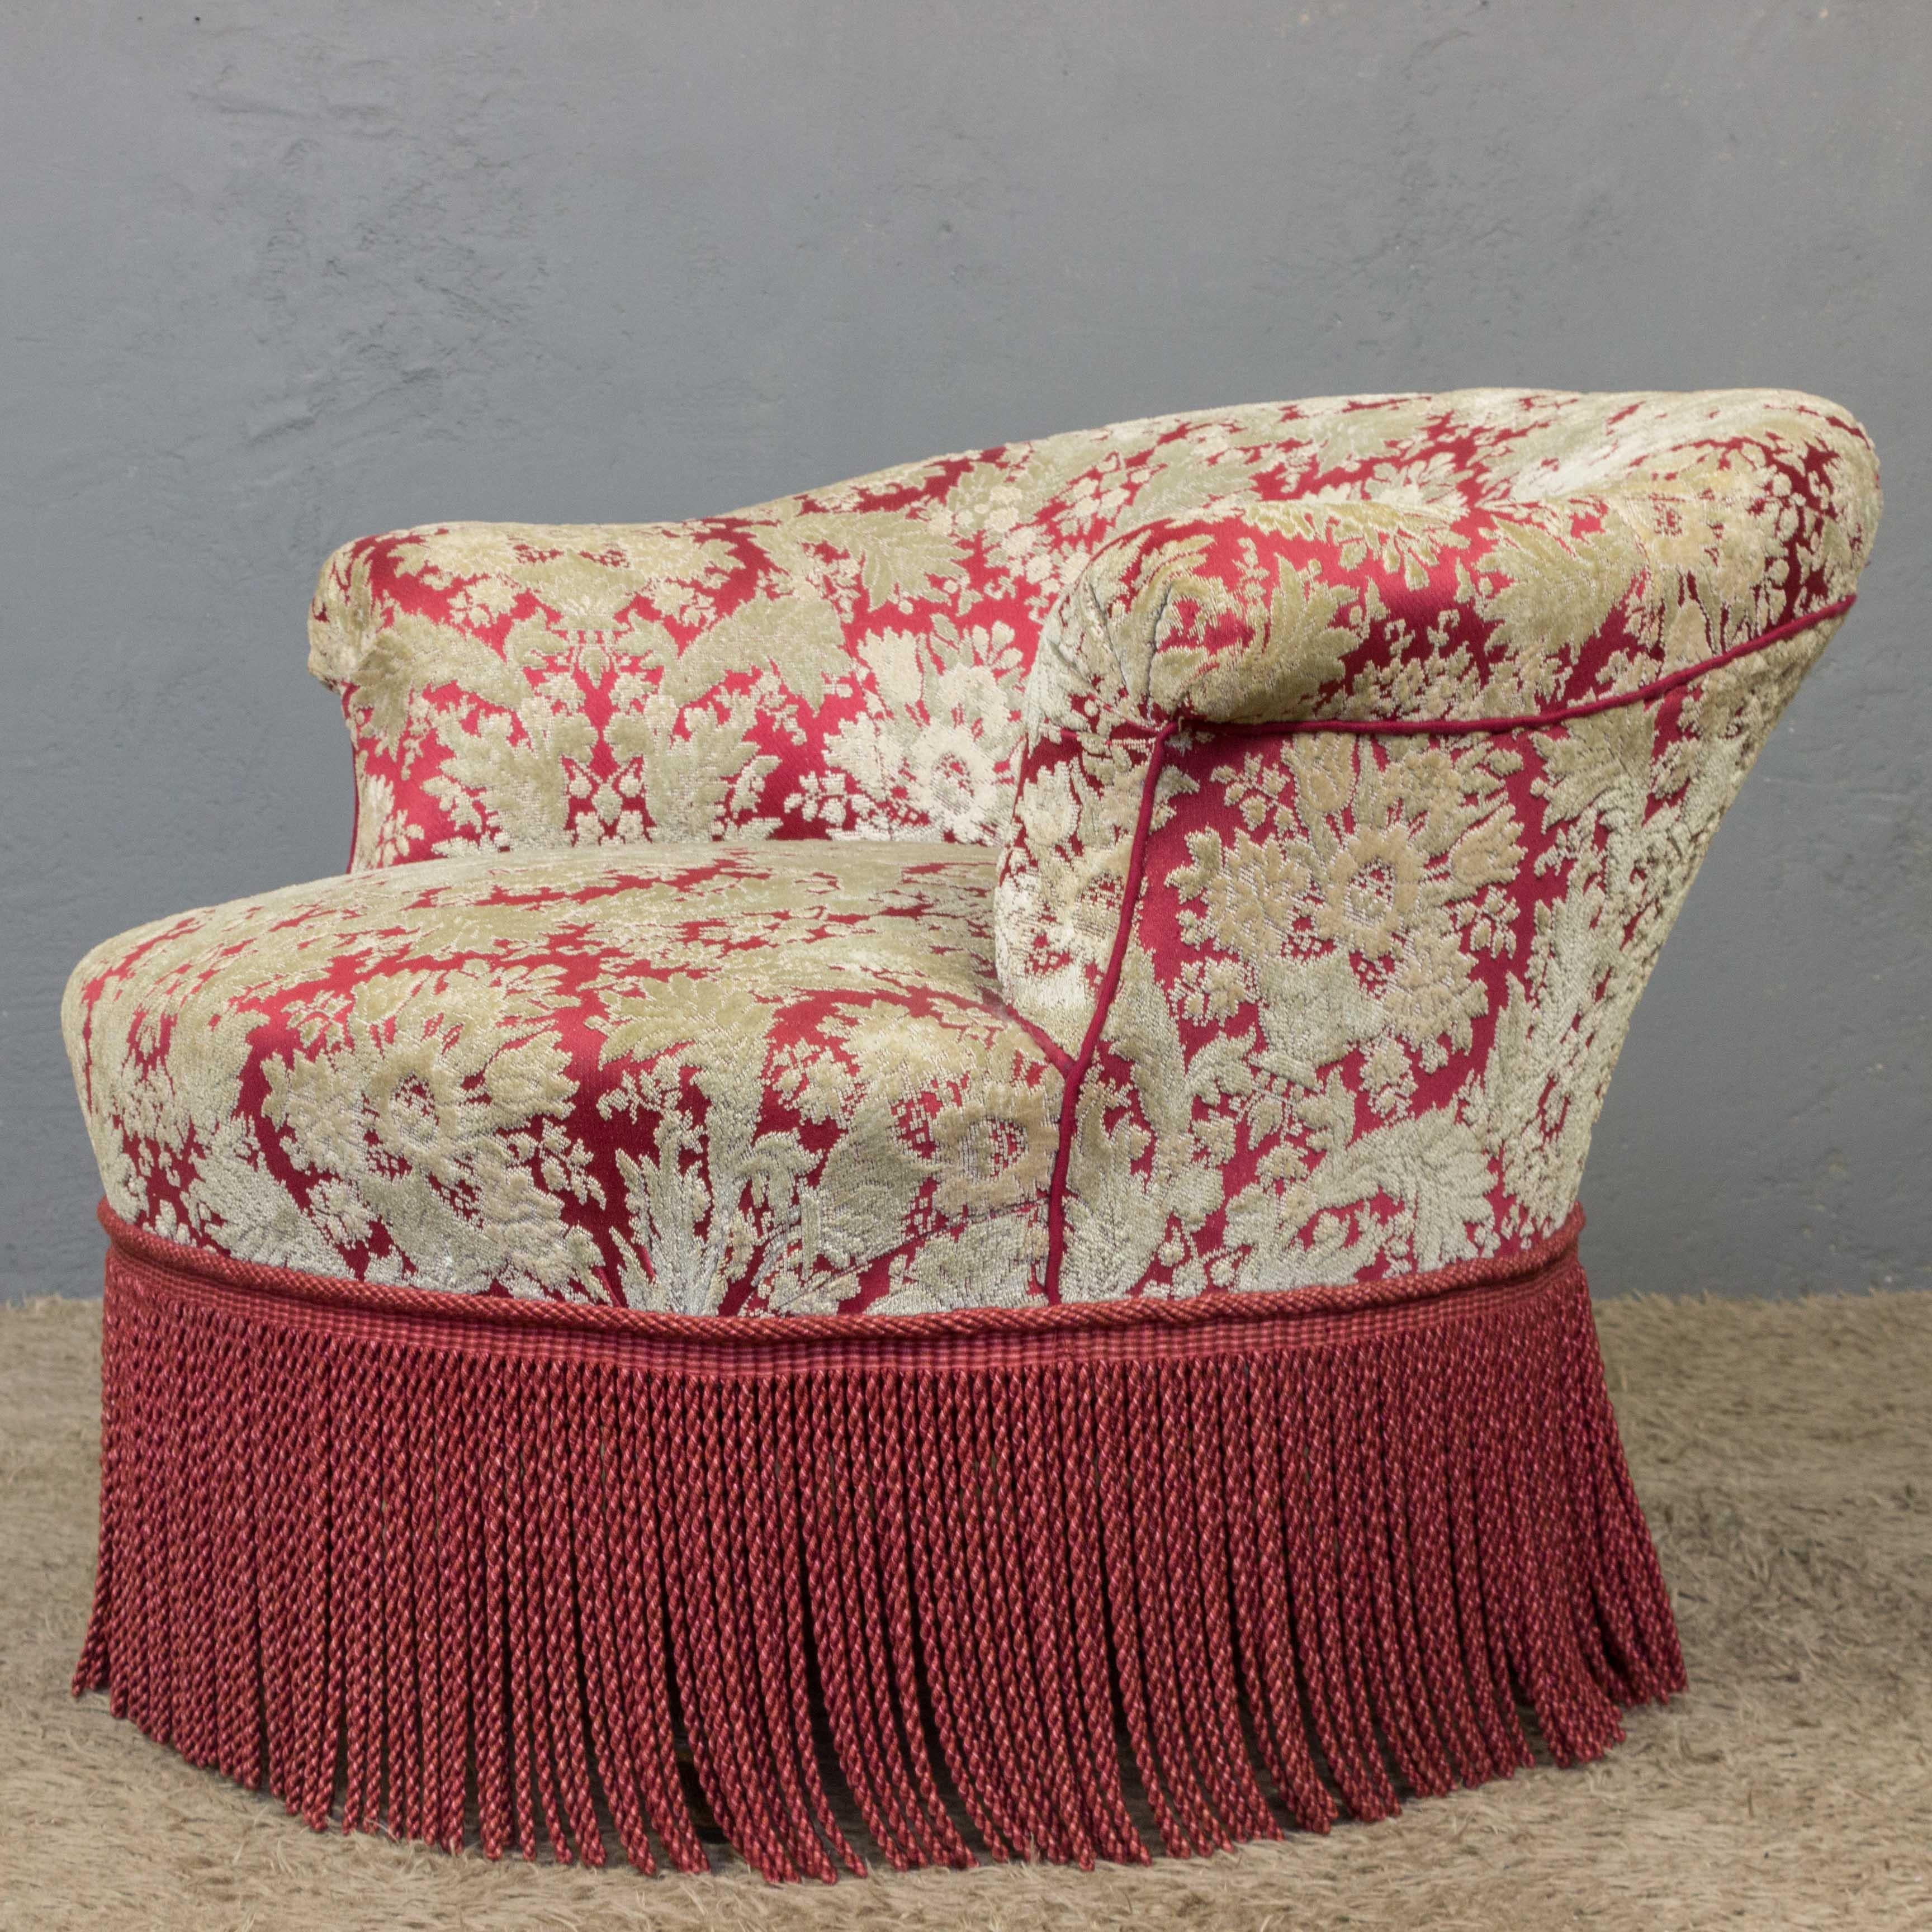 A stunning French Napoleon III slipper chair. This slipper chair is a truly unique piece, with its vintage floral fabric and bullion fringe providing an eye-catching contrast. In good vintage condition, this chair is sure to be a statement piece in